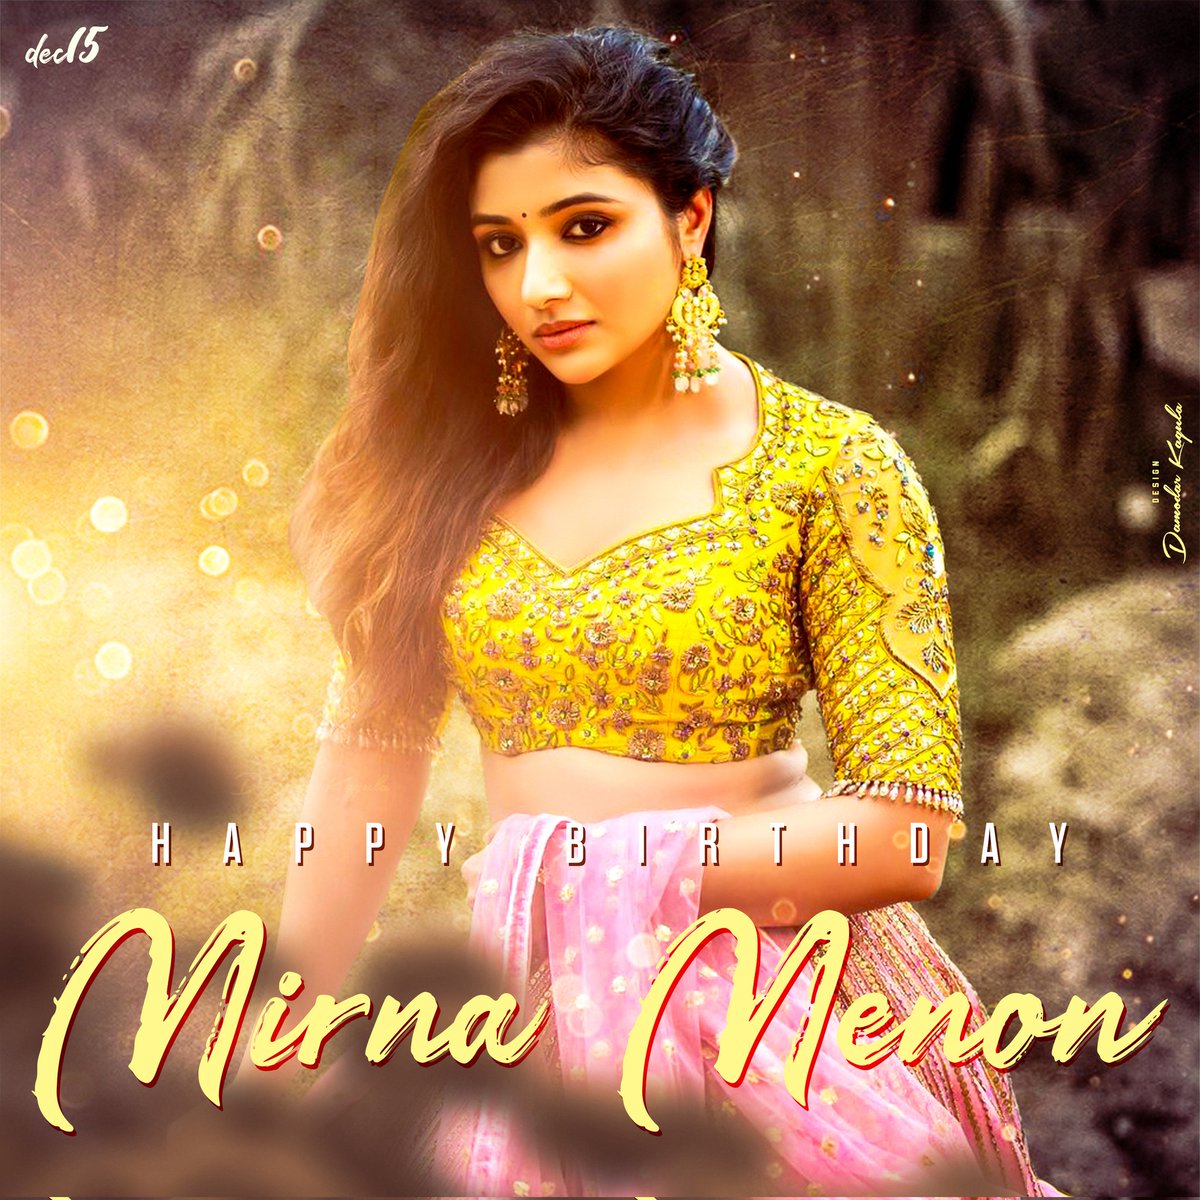 Here's the Special B'day design to celebrate the Beautiful and Talented Actress @mirnaaofficial a Happy Birthday.. Wishing her a great year ahead.. 😊 design : @damodar_kagula #HBDMirnaa #HappyBirthdayMirnaa #Mirnamenon @Mirnaa_FanClub @MirnaaQuotes @Mirnaa_FC